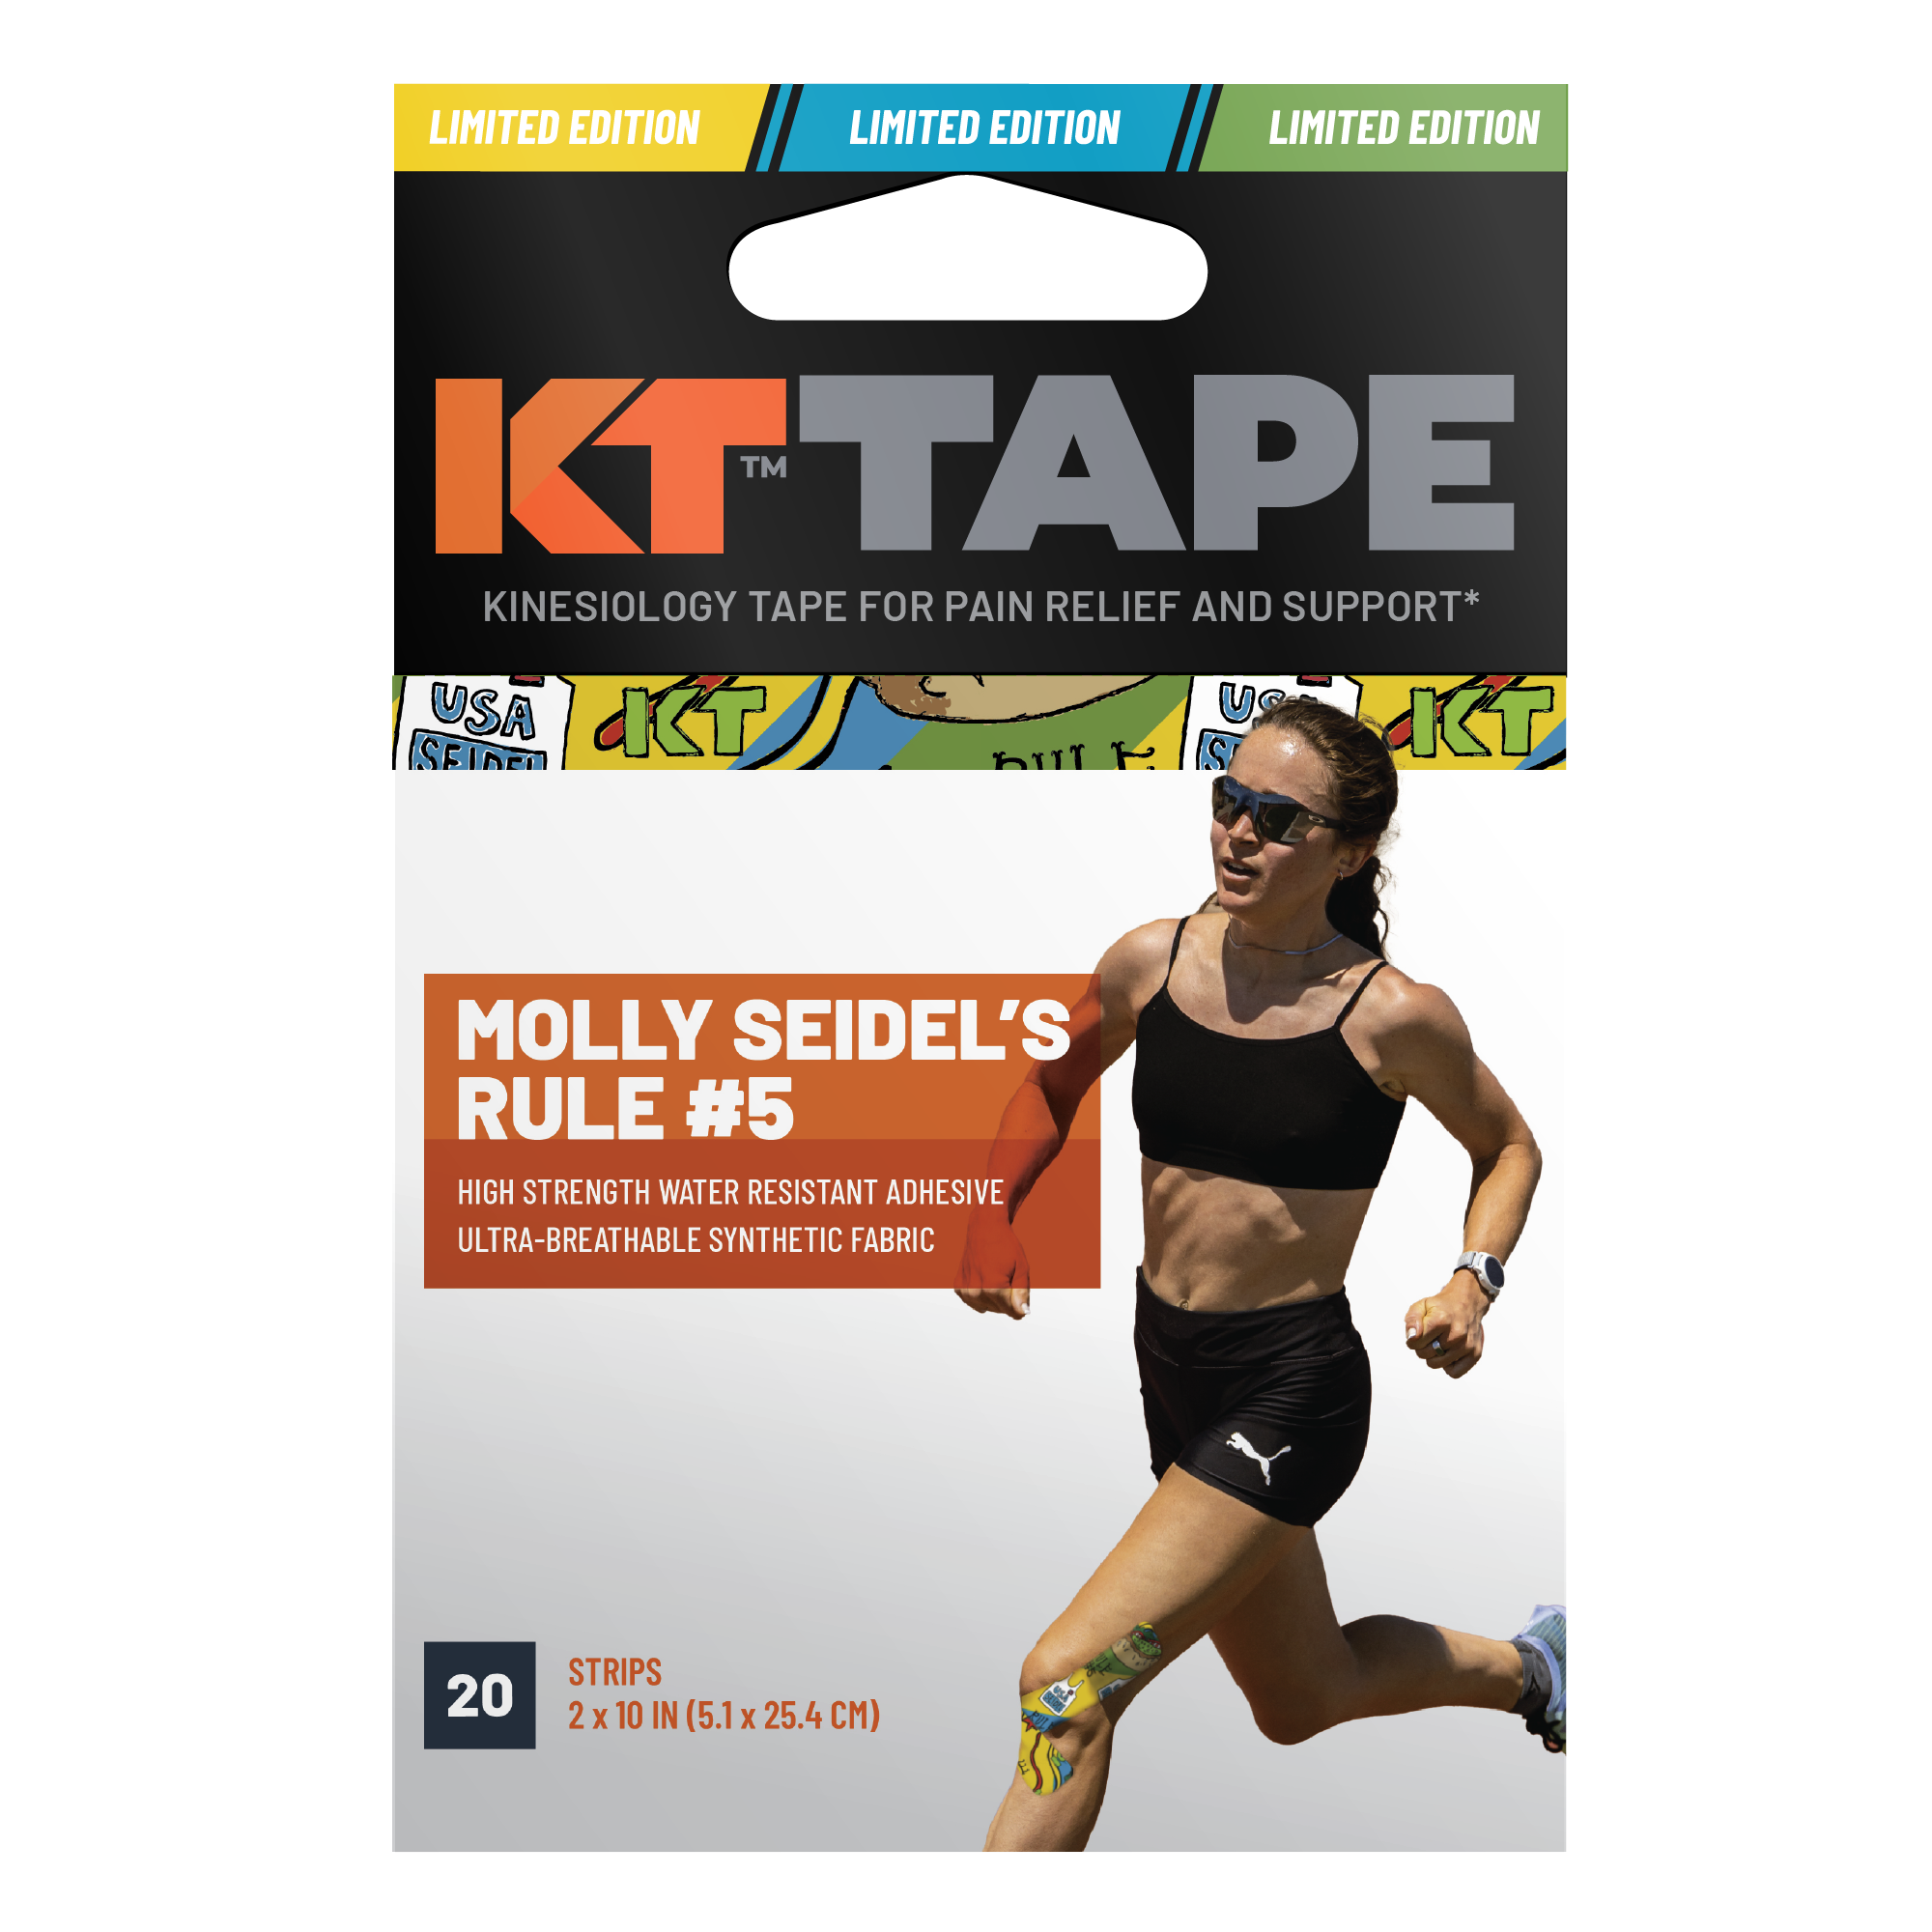 KT Tape Pro Extreme - Molly's Rule #5 Limited Edition Tape